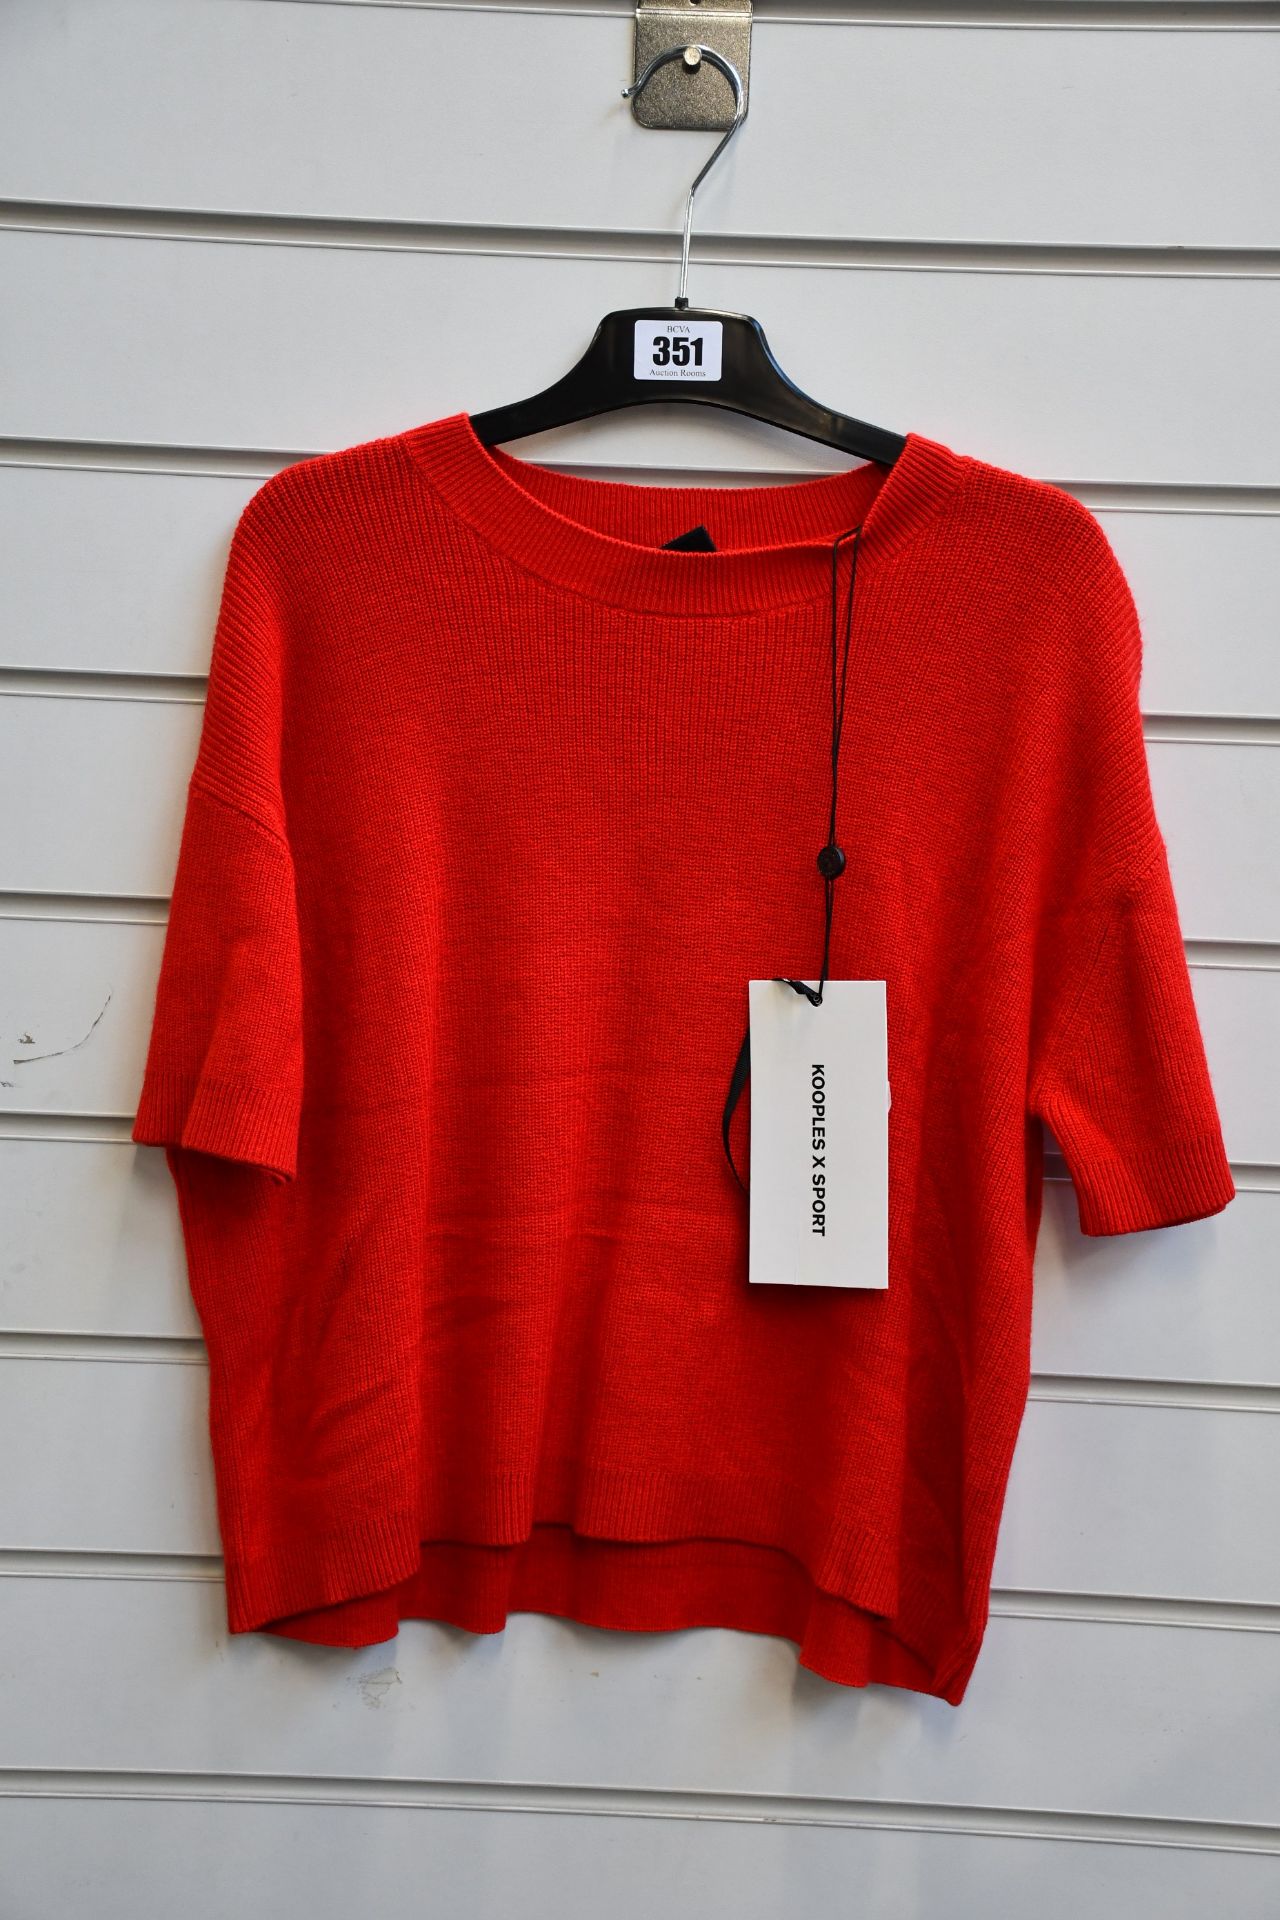 An as new The Kooples Piercing and Wool top (Size 1 - RRP £175).